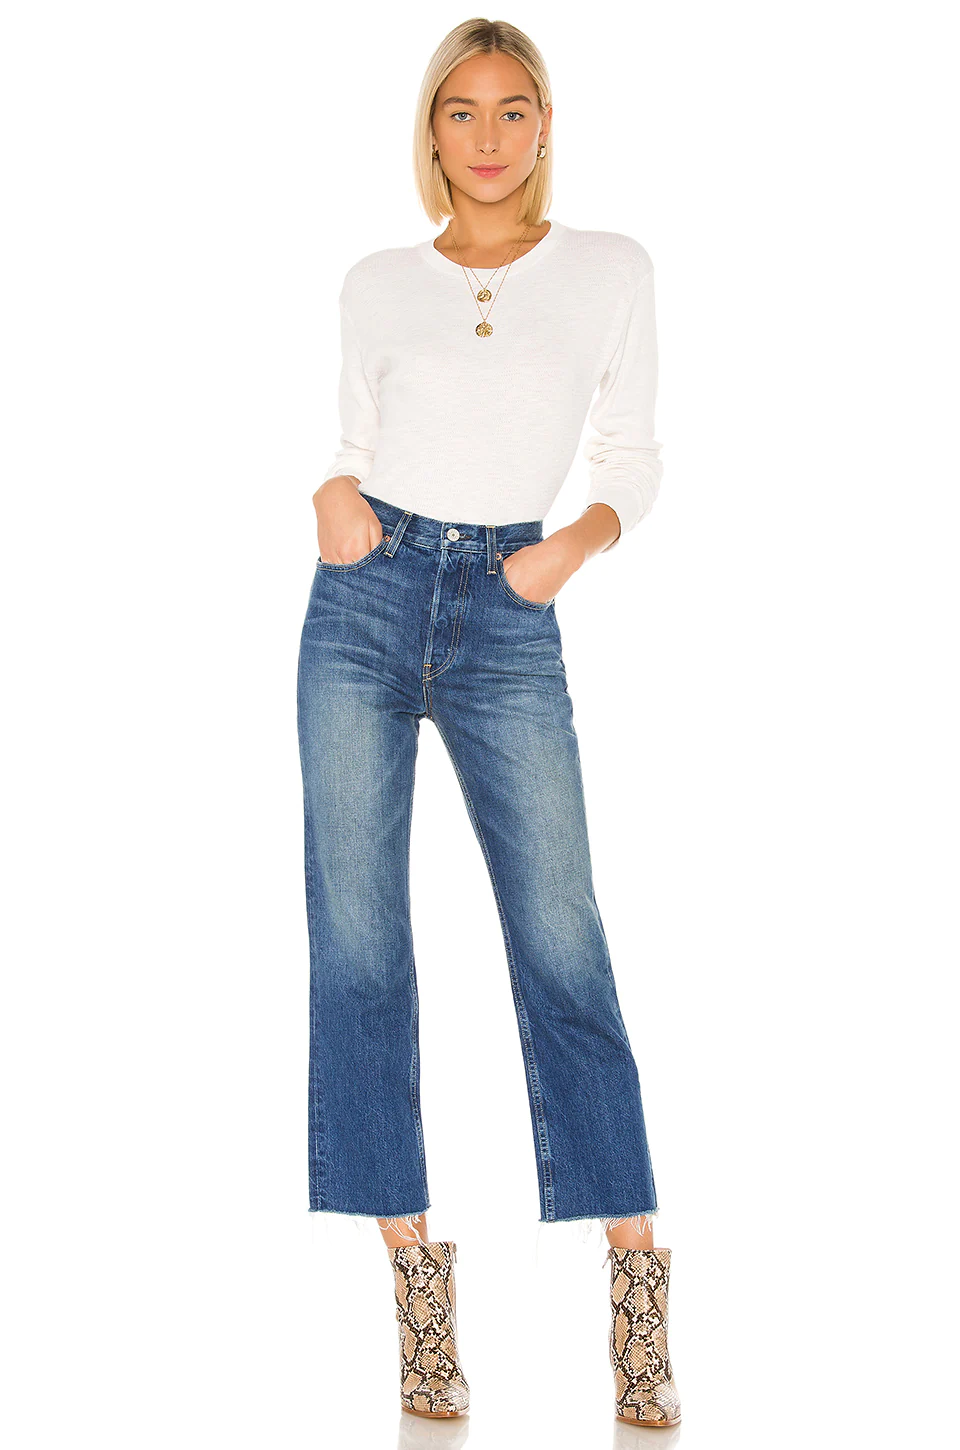 2.-Cotton-Shirt-and-Mom-Jeans.webp